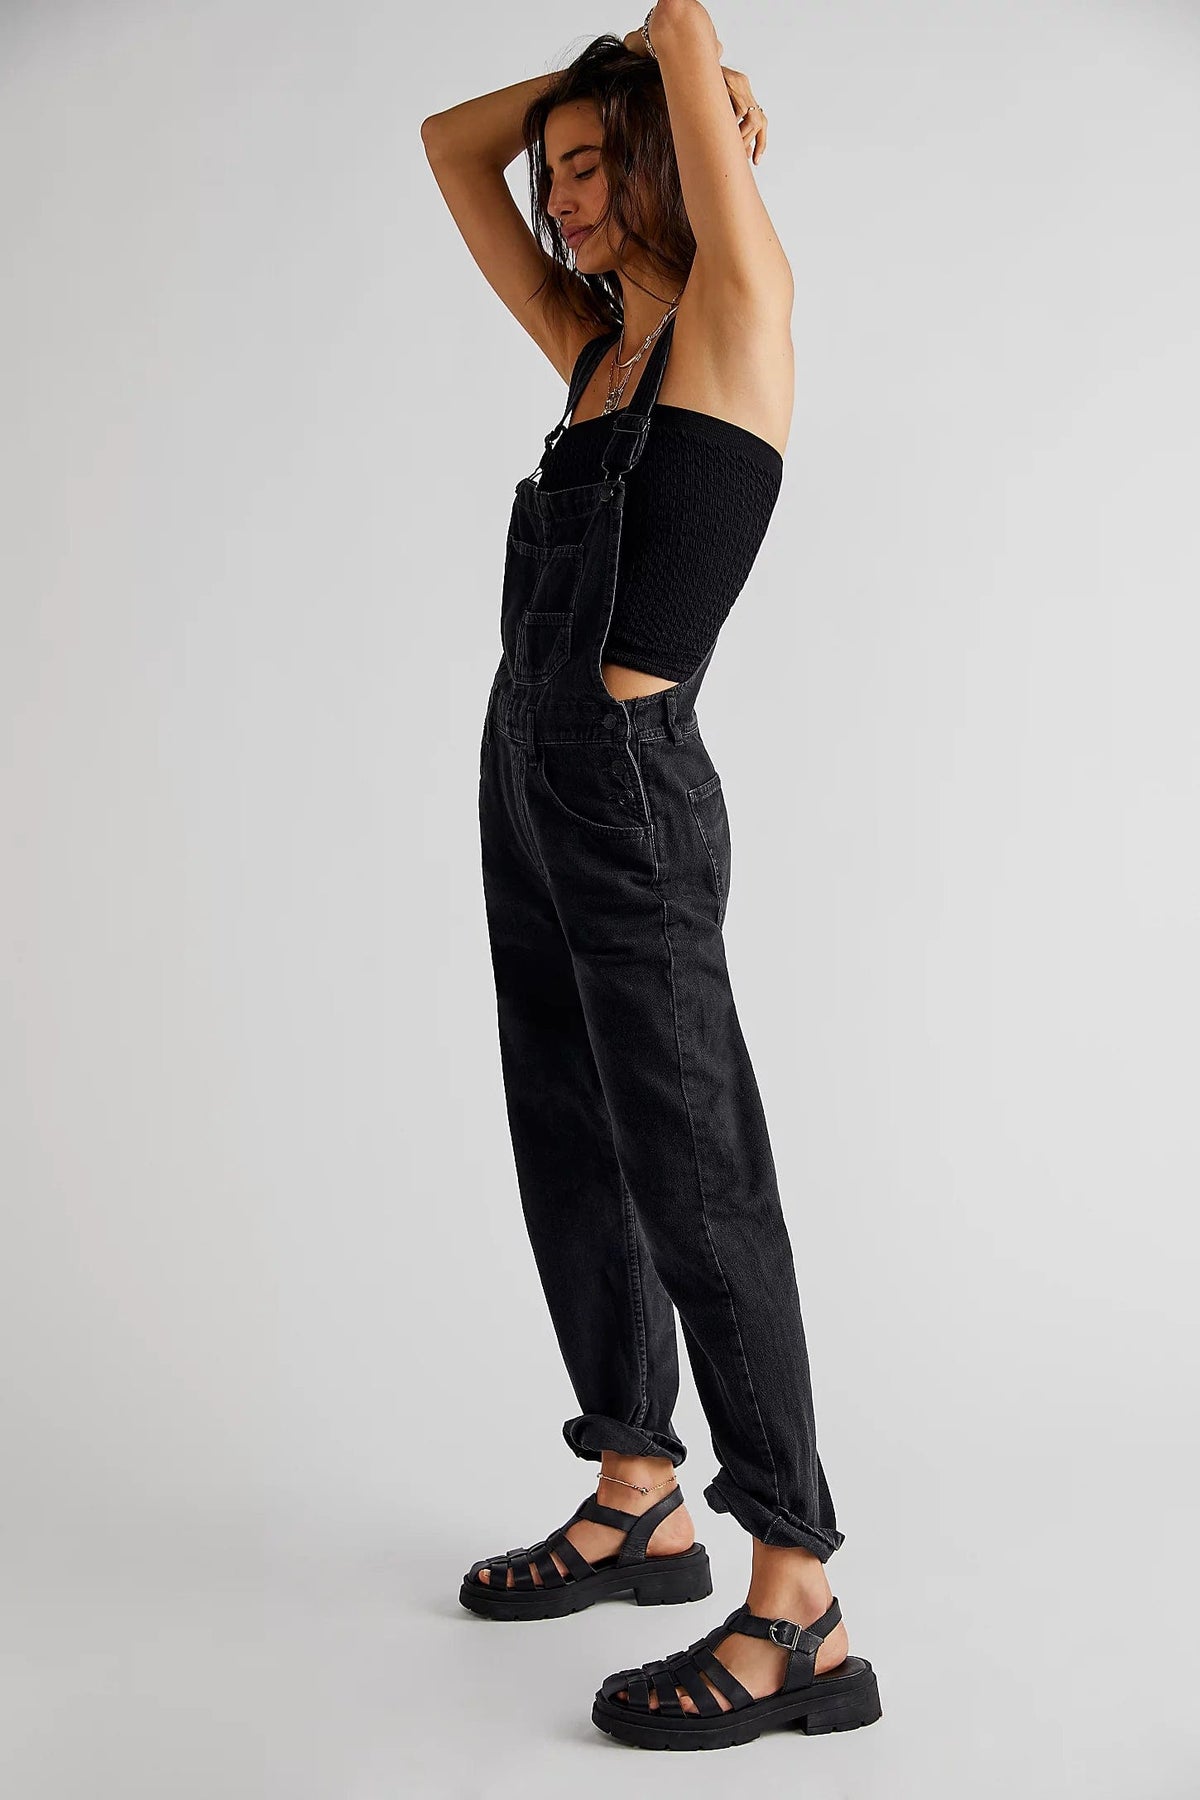 Long Free People Ziggy Overalls in Mineral Black